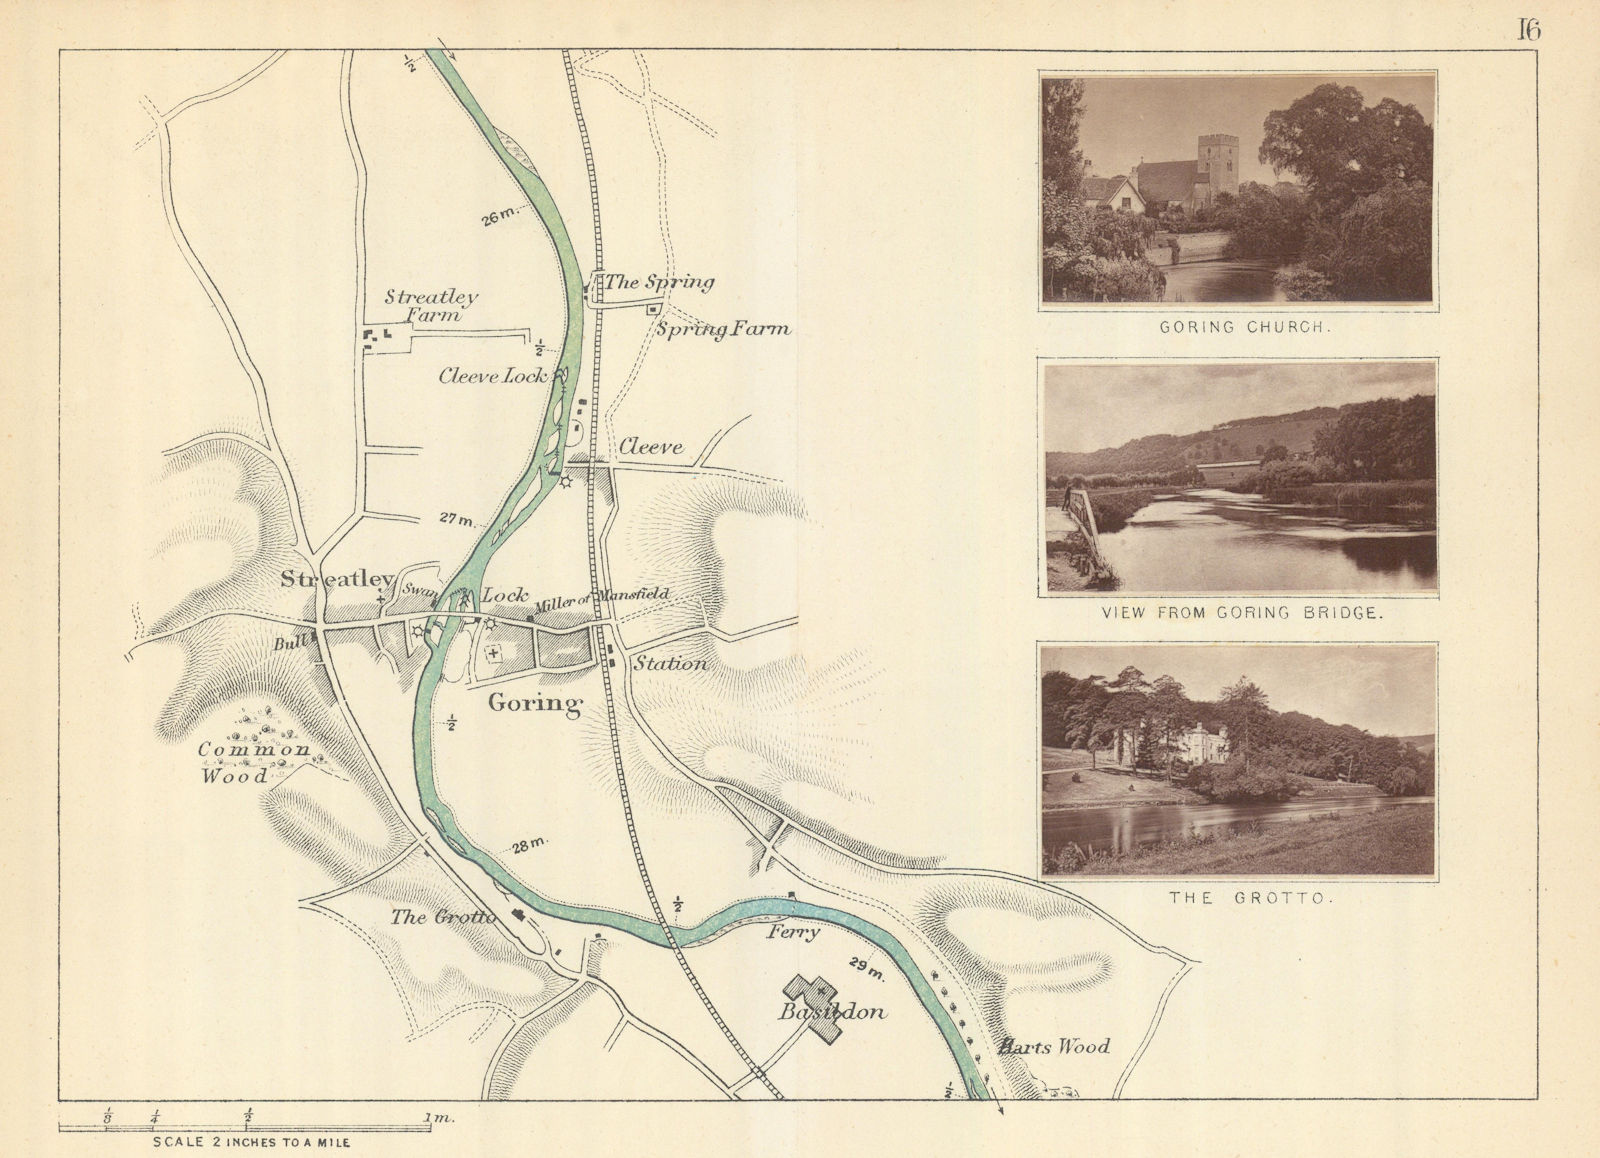 RIVER THAMES - Goring - Streatley - Basildon. The Grotto. TAUNT 1879 old map